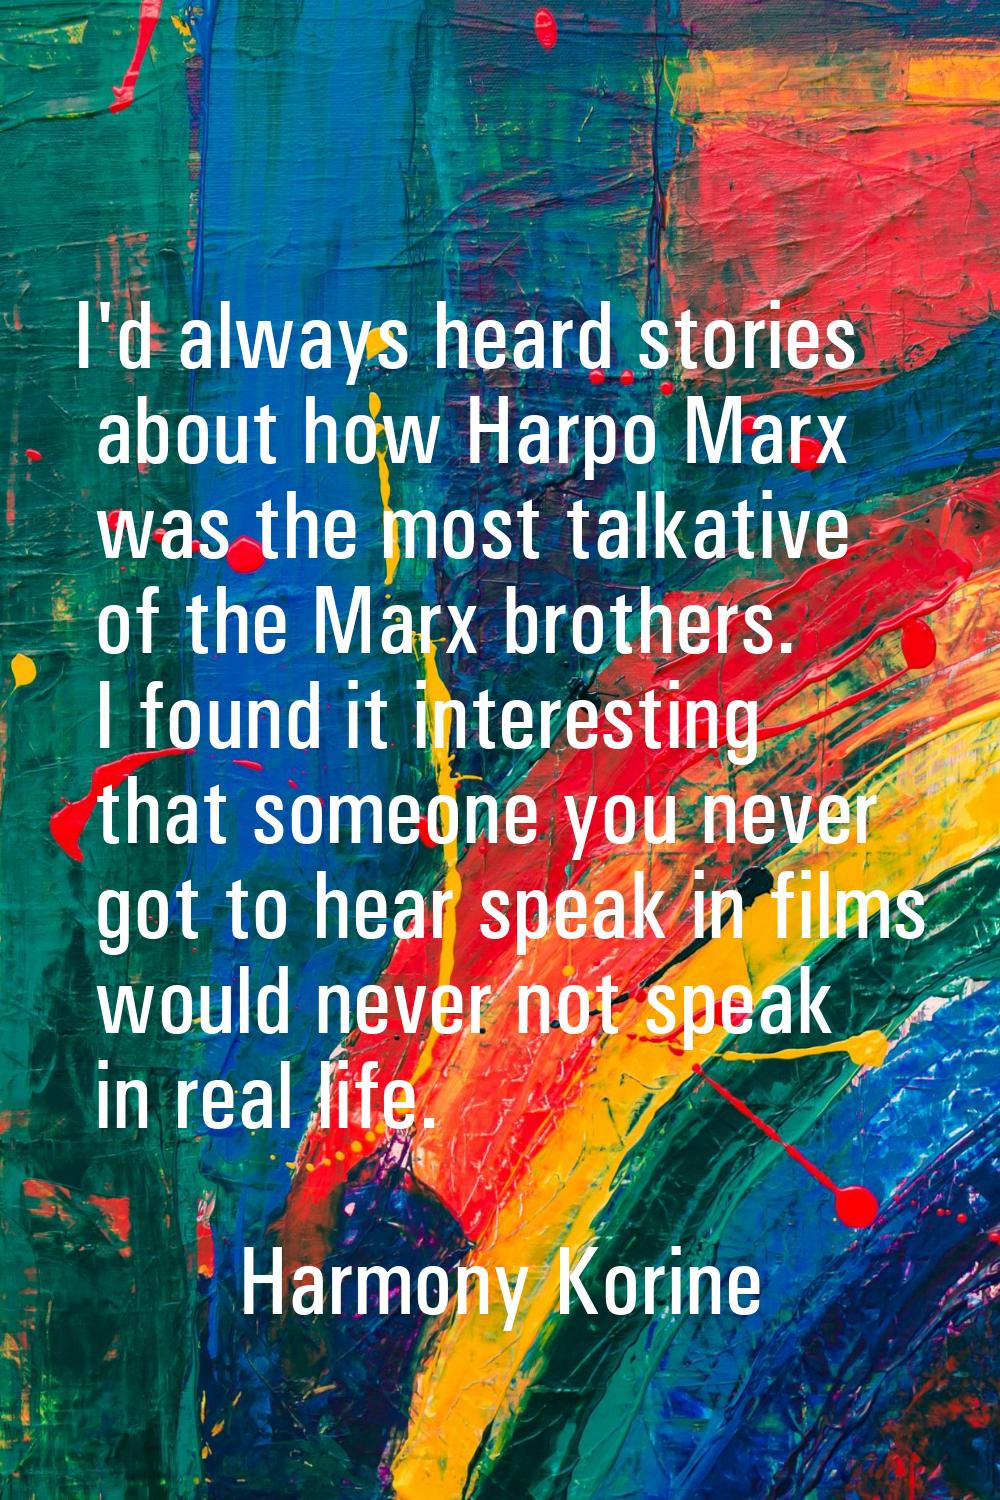 I'd always heard stories about how Harpo Marx was the most talkative of the Marx brothers. I found 